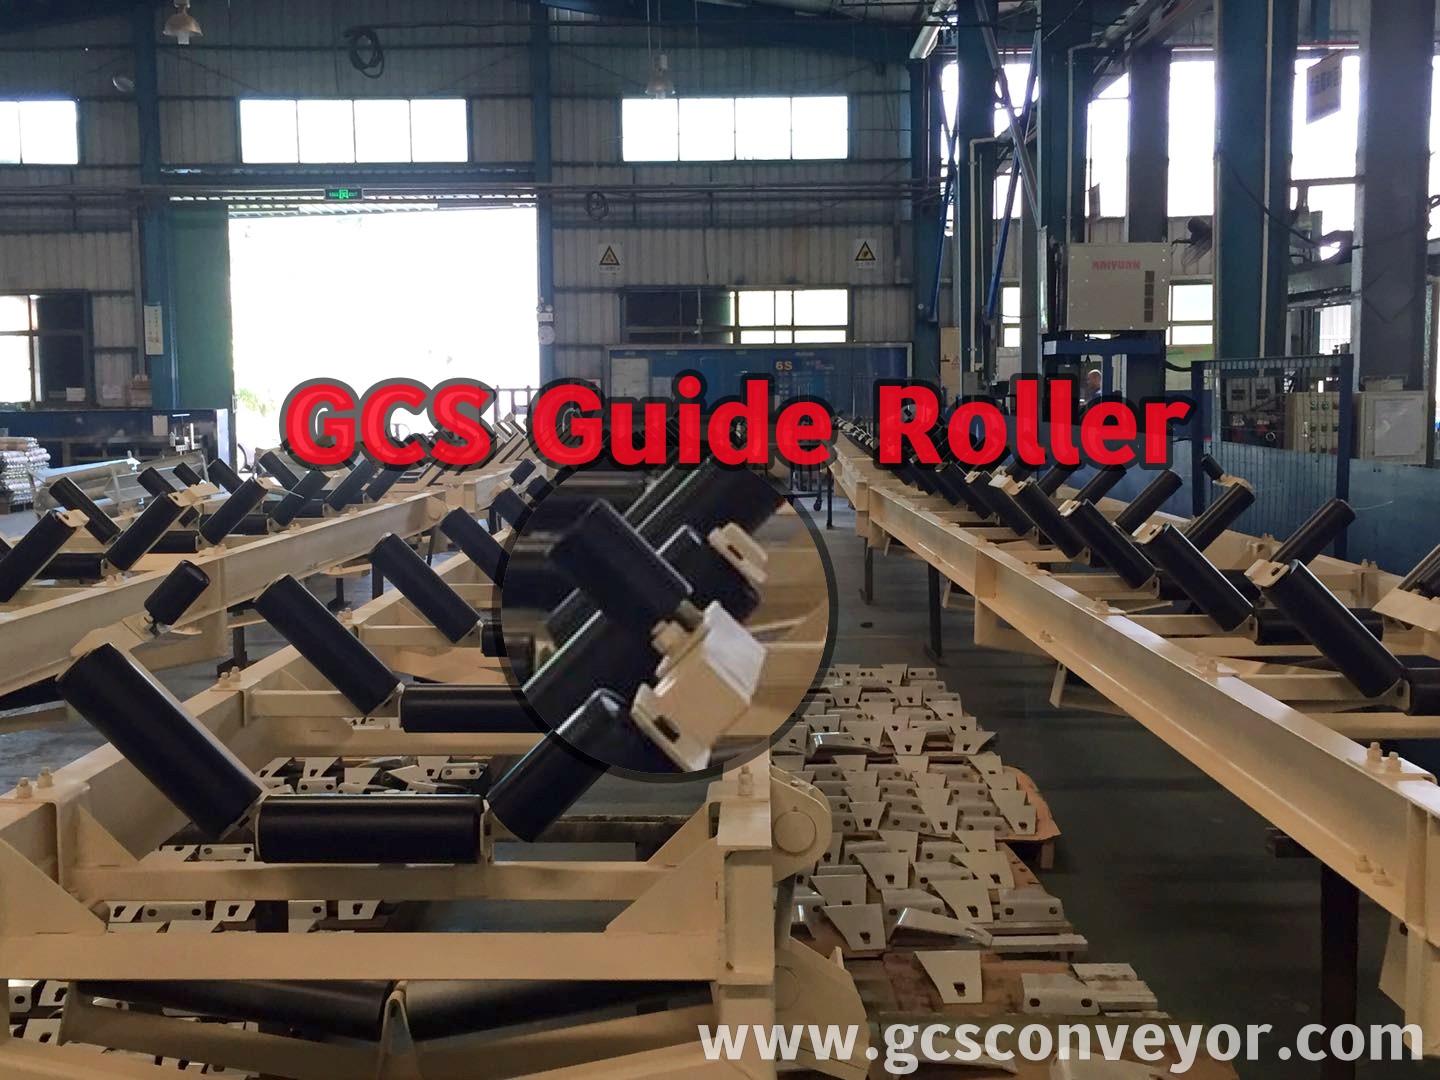 What is a conveyor guide roller?